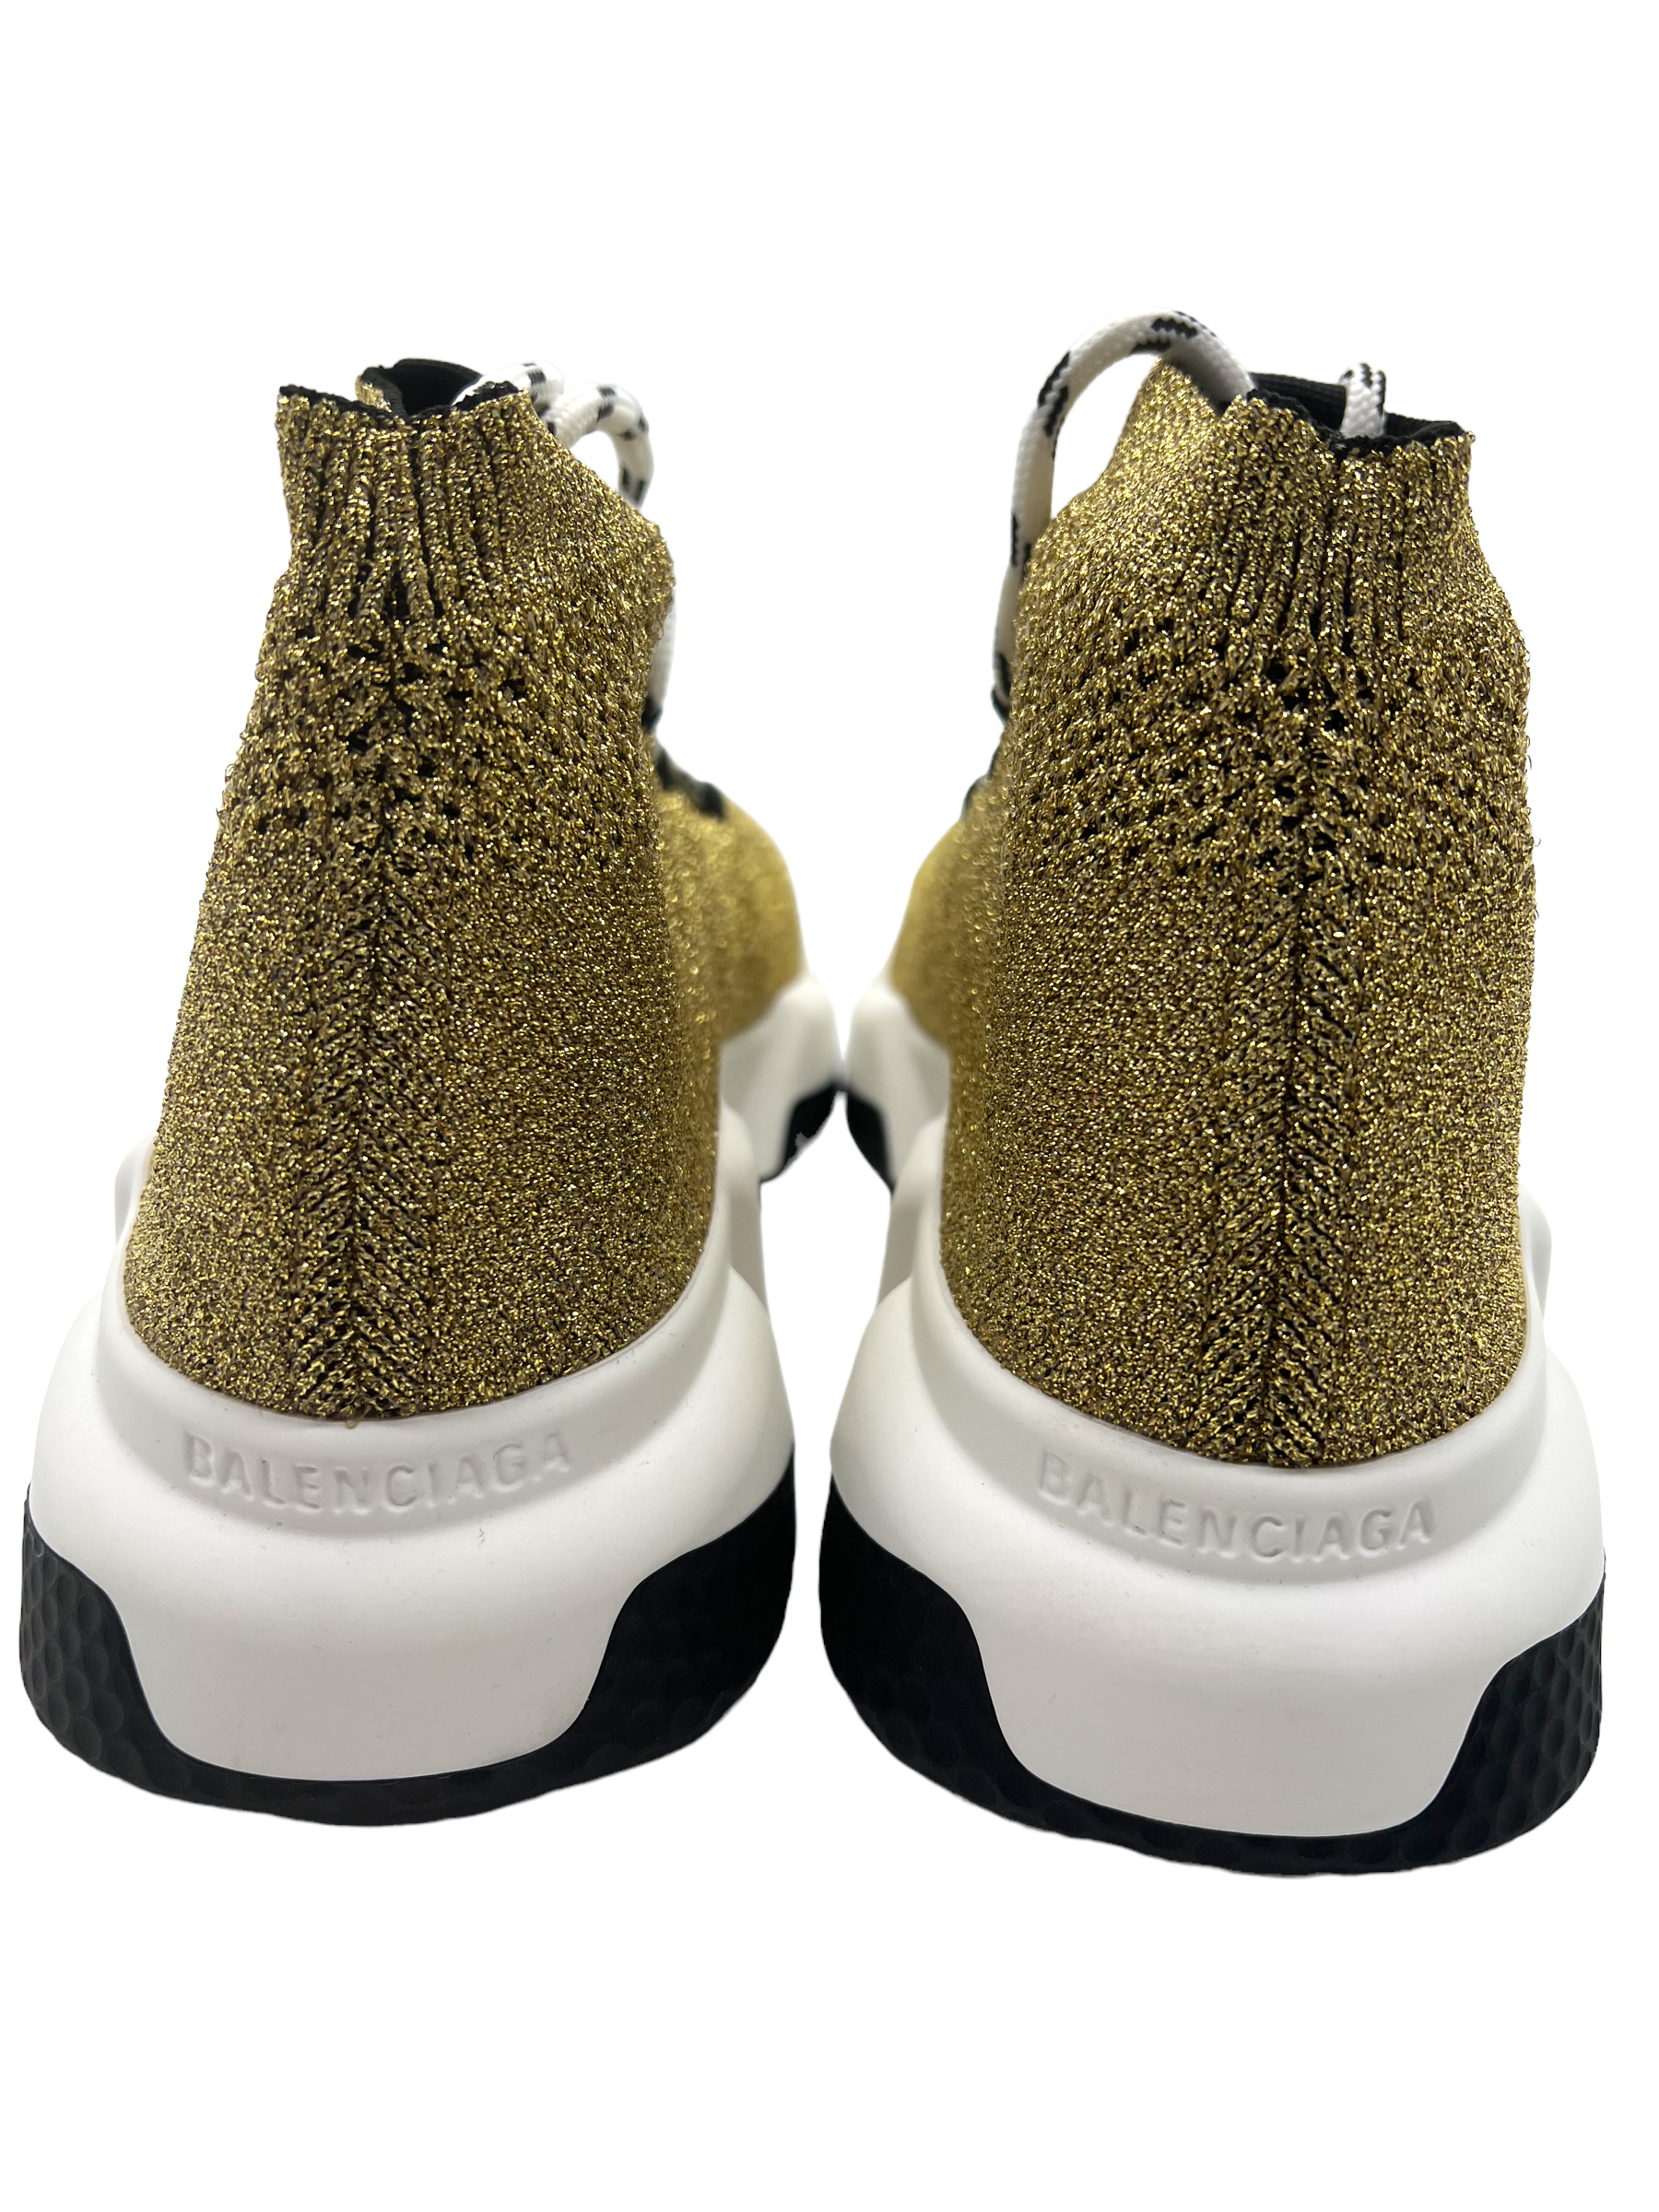 Balenciaga Light Brown Knit Fabric Speed Trainer Sneakers Size 38